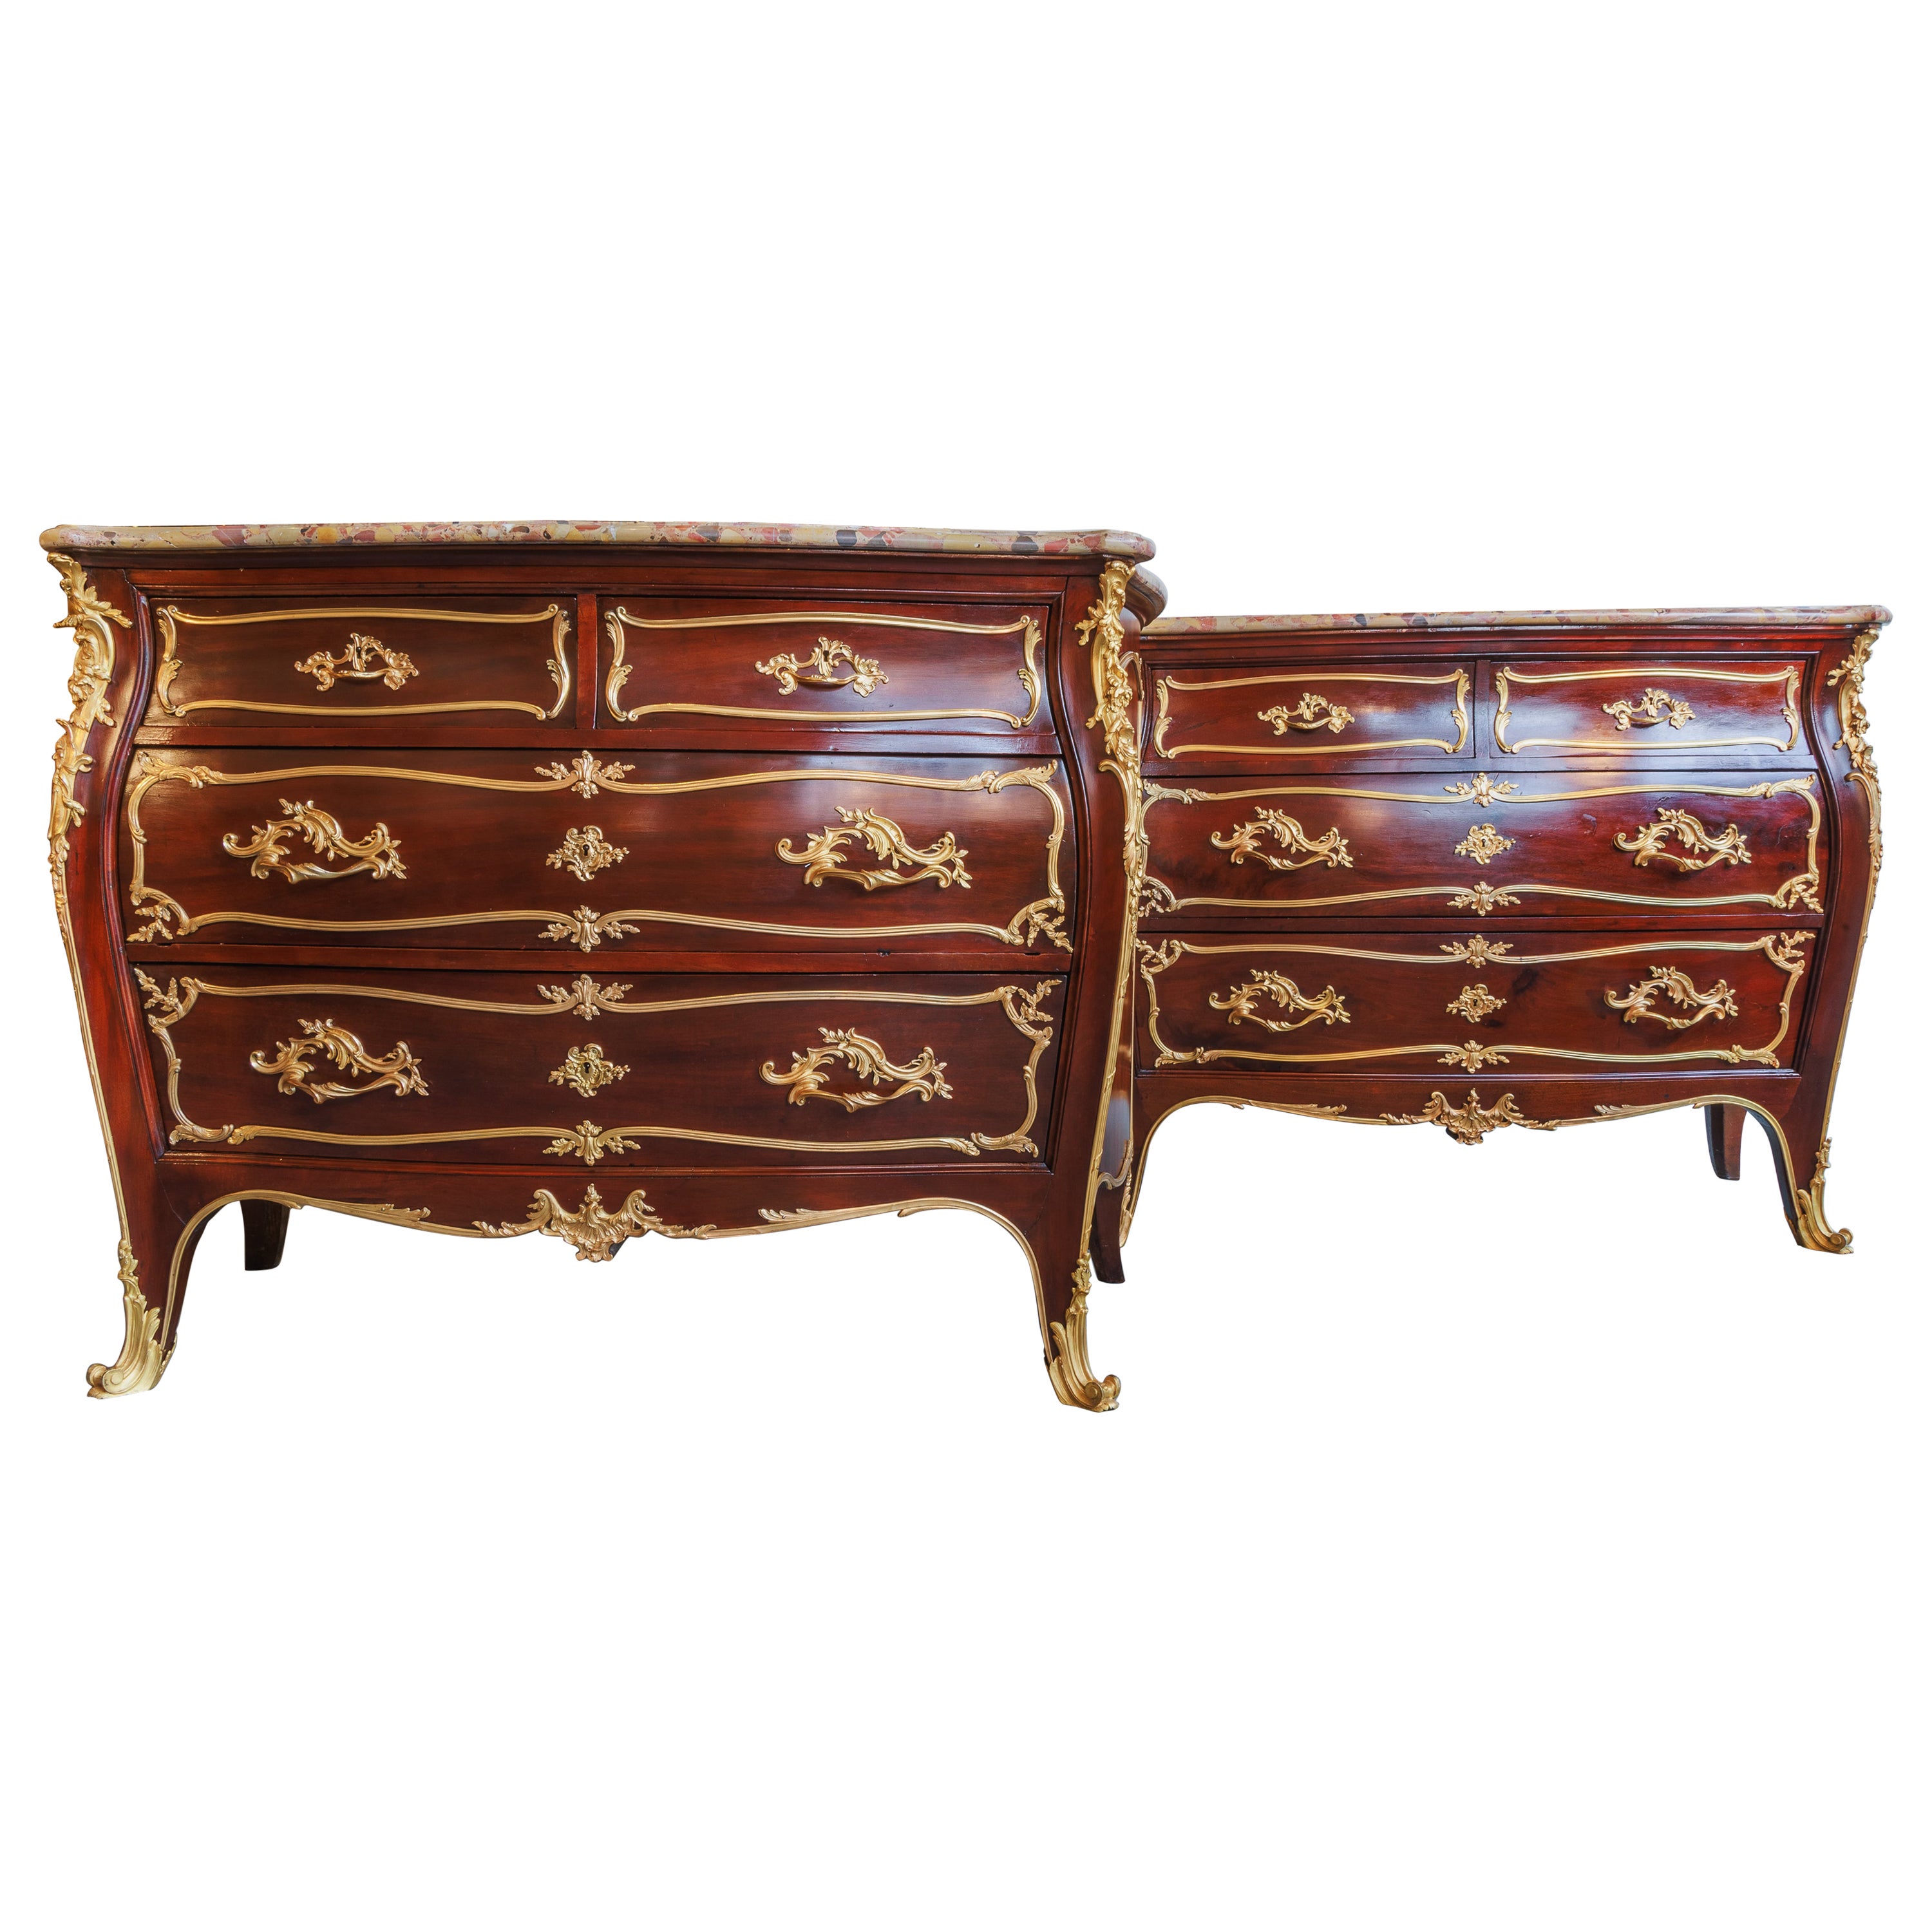 A  pair of French 19th c mahogany and gilt bronze mounted commodes by F. Linke For Sale